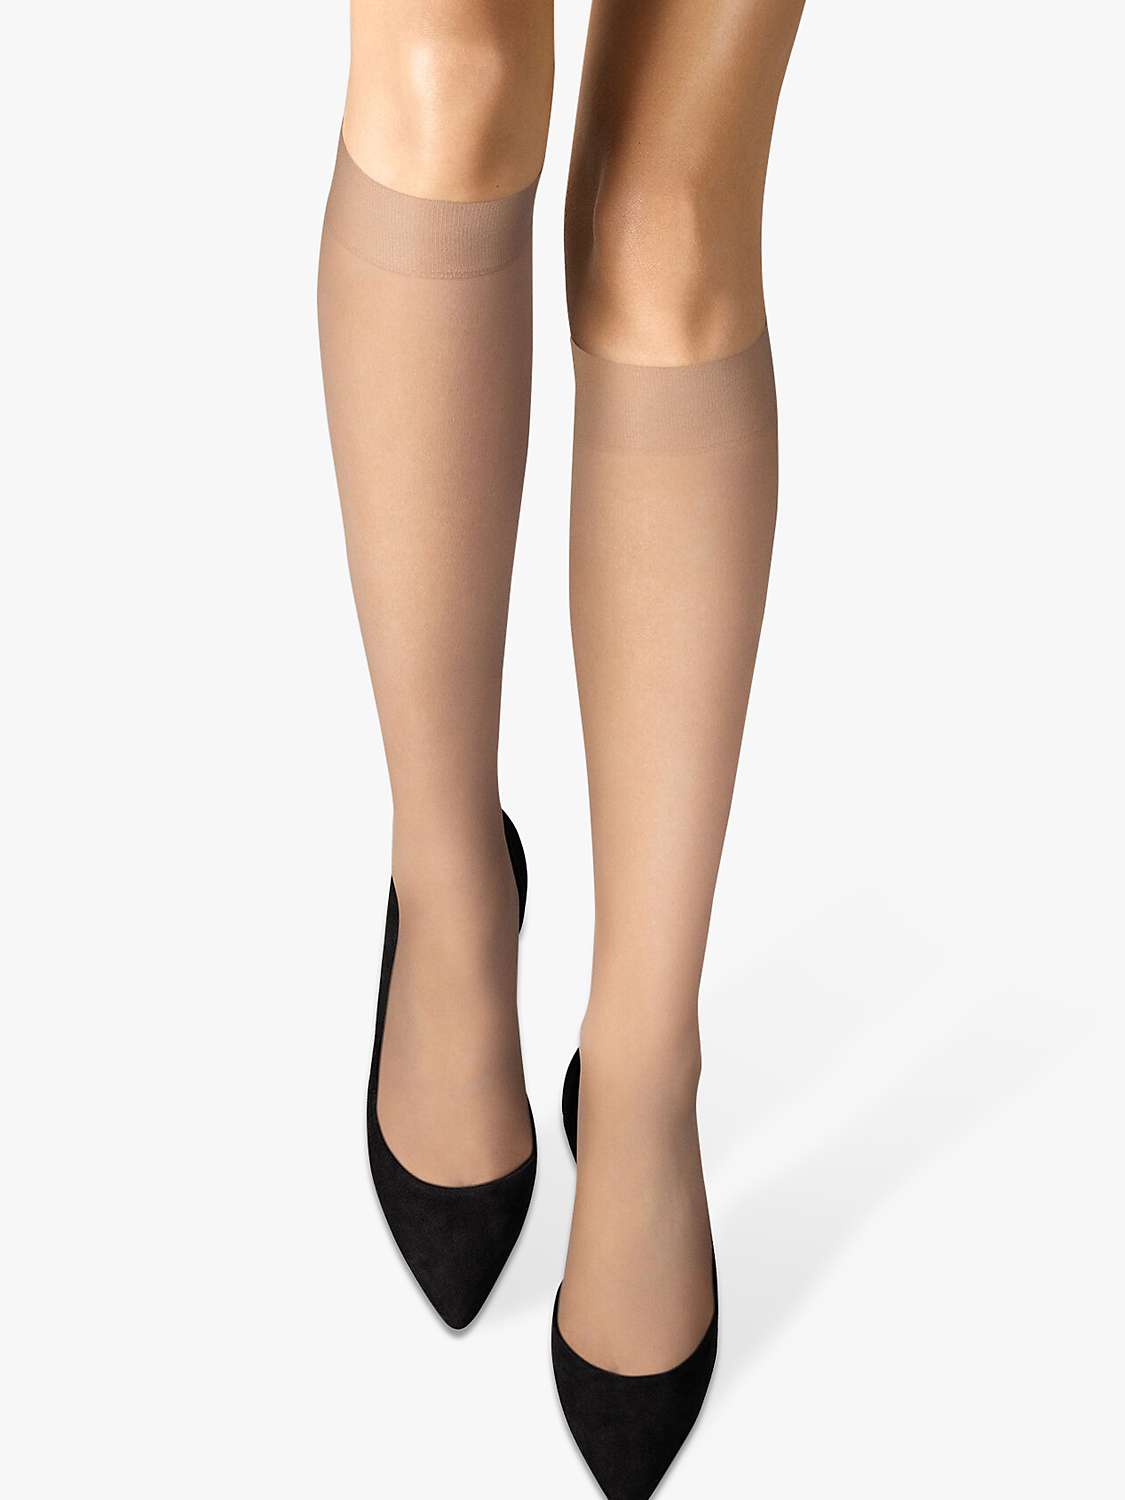 Buy Wolford Satin Touch 20 Denier Knee High Socks, Pack of 3, Cosmetic Online at johnlewis.com